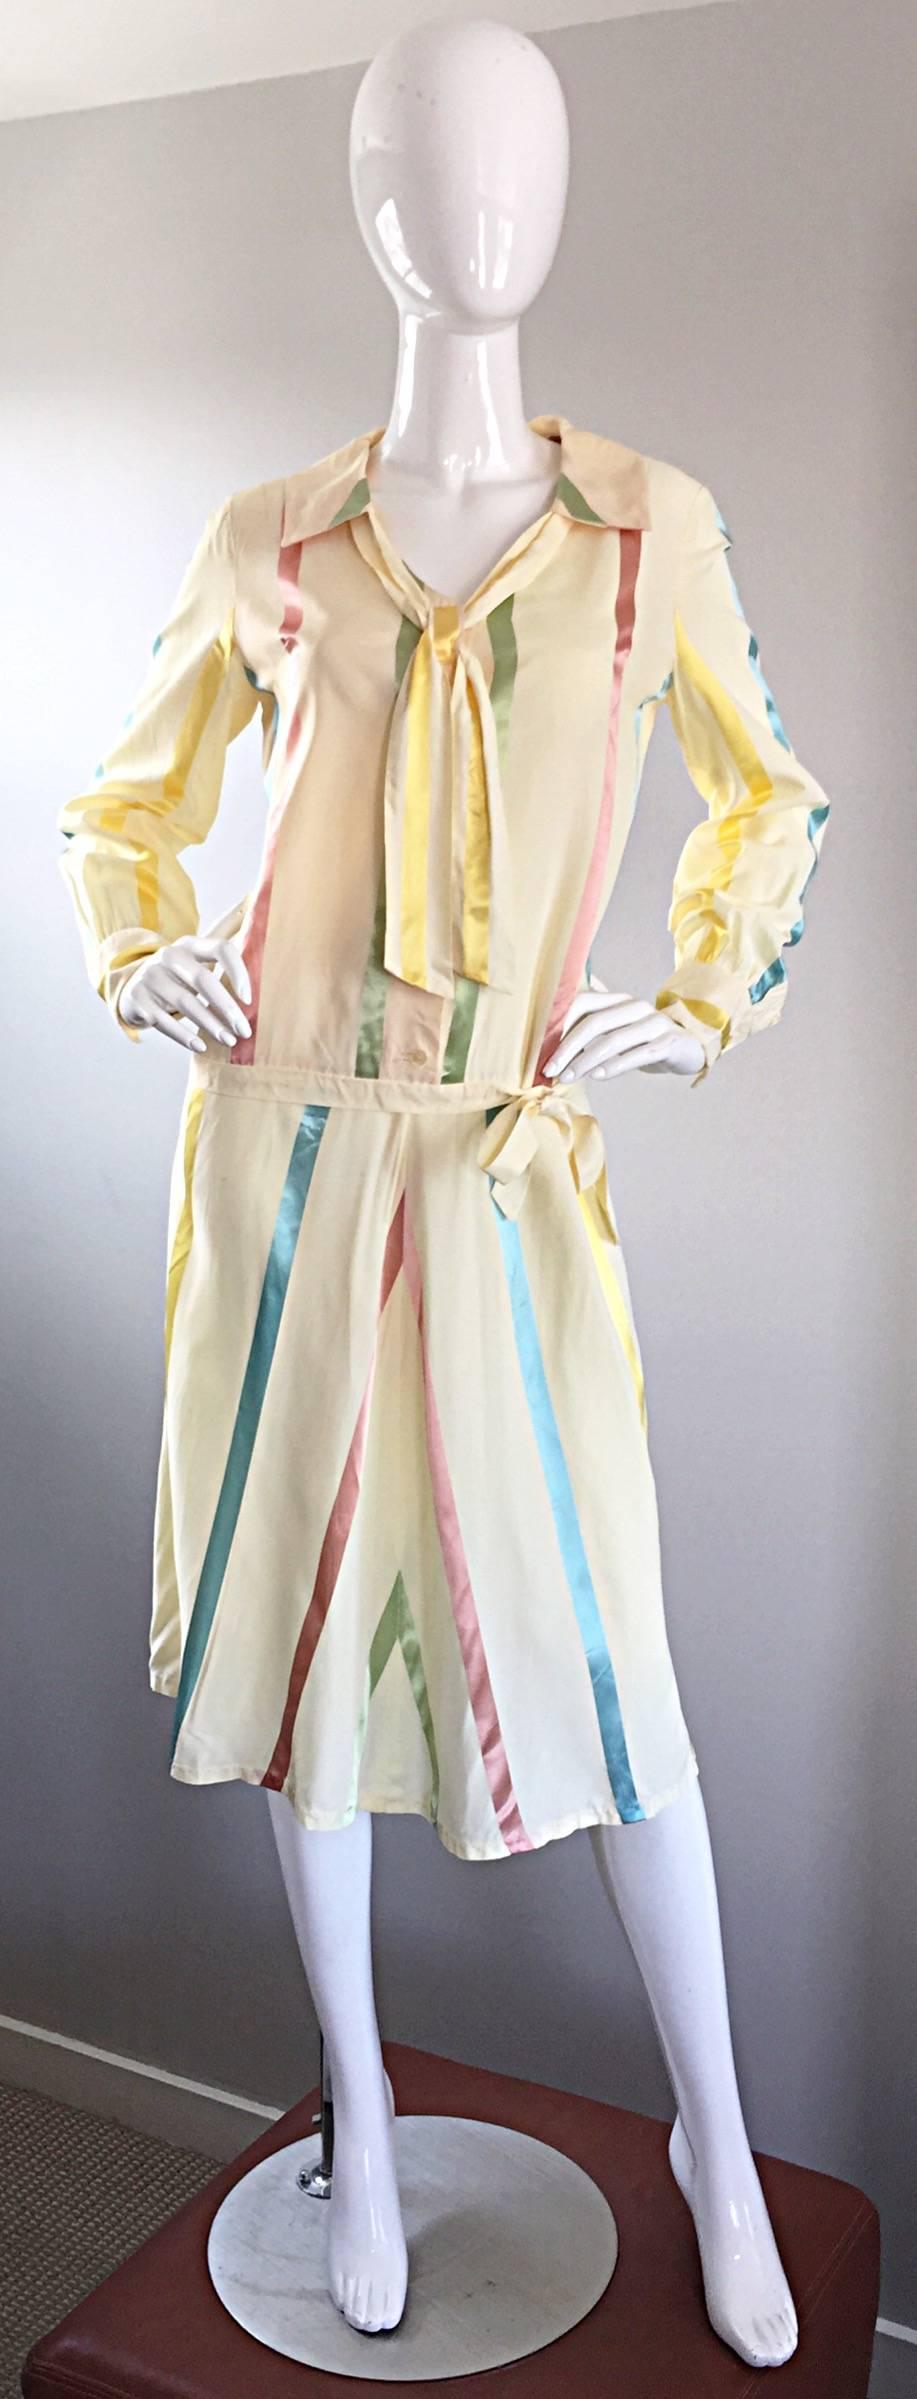 Incredibly chic 1920s 20s silk vintage dress! Classic drop waist style with a side bow at the waist. Tie at neck. Ivory silk with pastel blue, pink, yellow and green vertical stripes throughout. Fantastic 